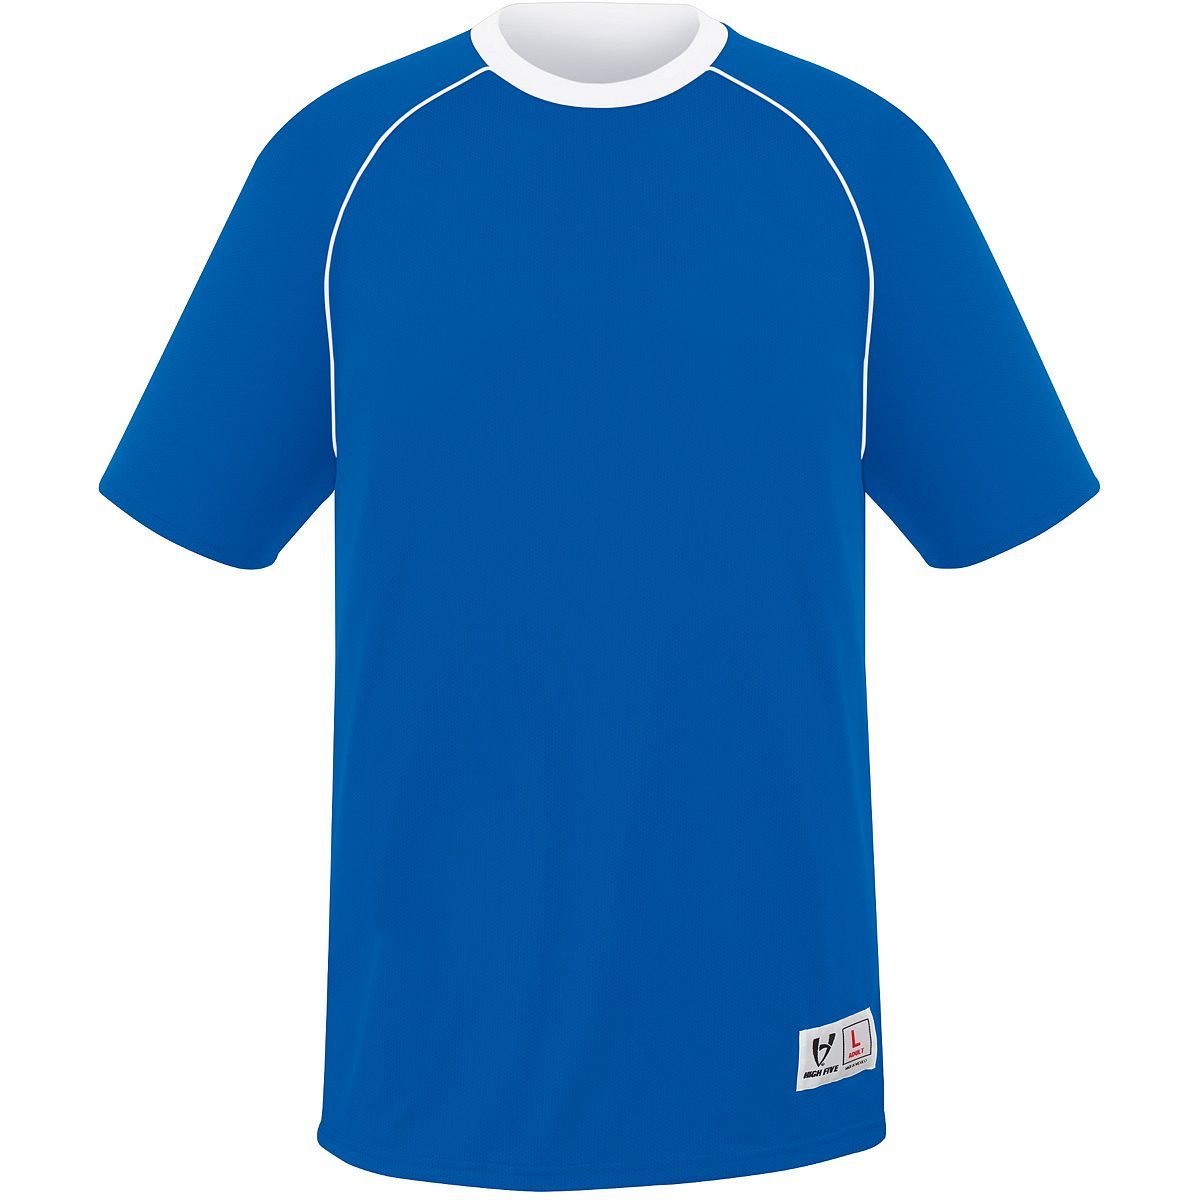 High 5 Youth Conversion Reversible Jersey in Royal/White  -Part of the Youth, Youth-Jersey, High5-Products, Soccer, Shirts, All-Sports-1 product lines at KanaleyCreations.com